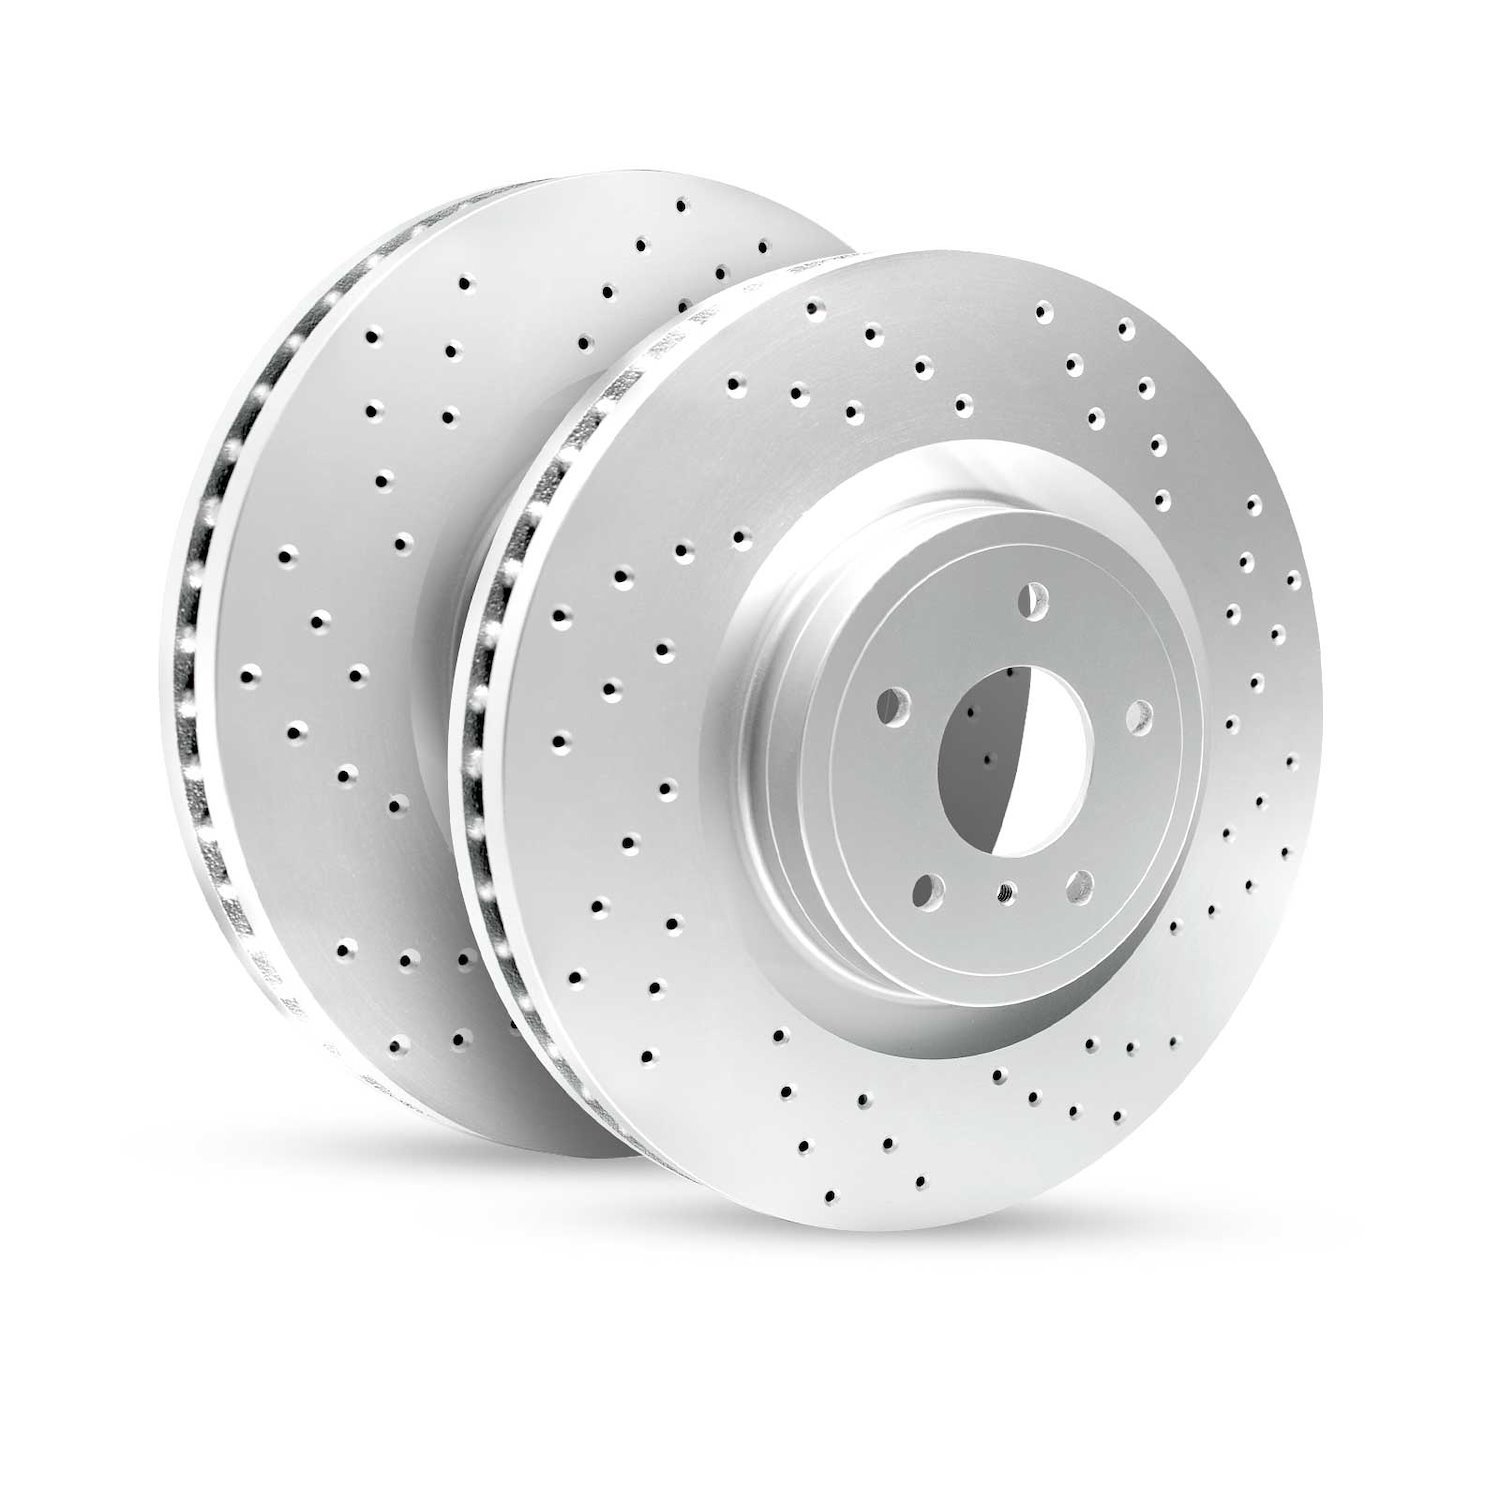 GEO-Carbon Drilled/Slotted Rotors, Fits Select Alfa Romeo,